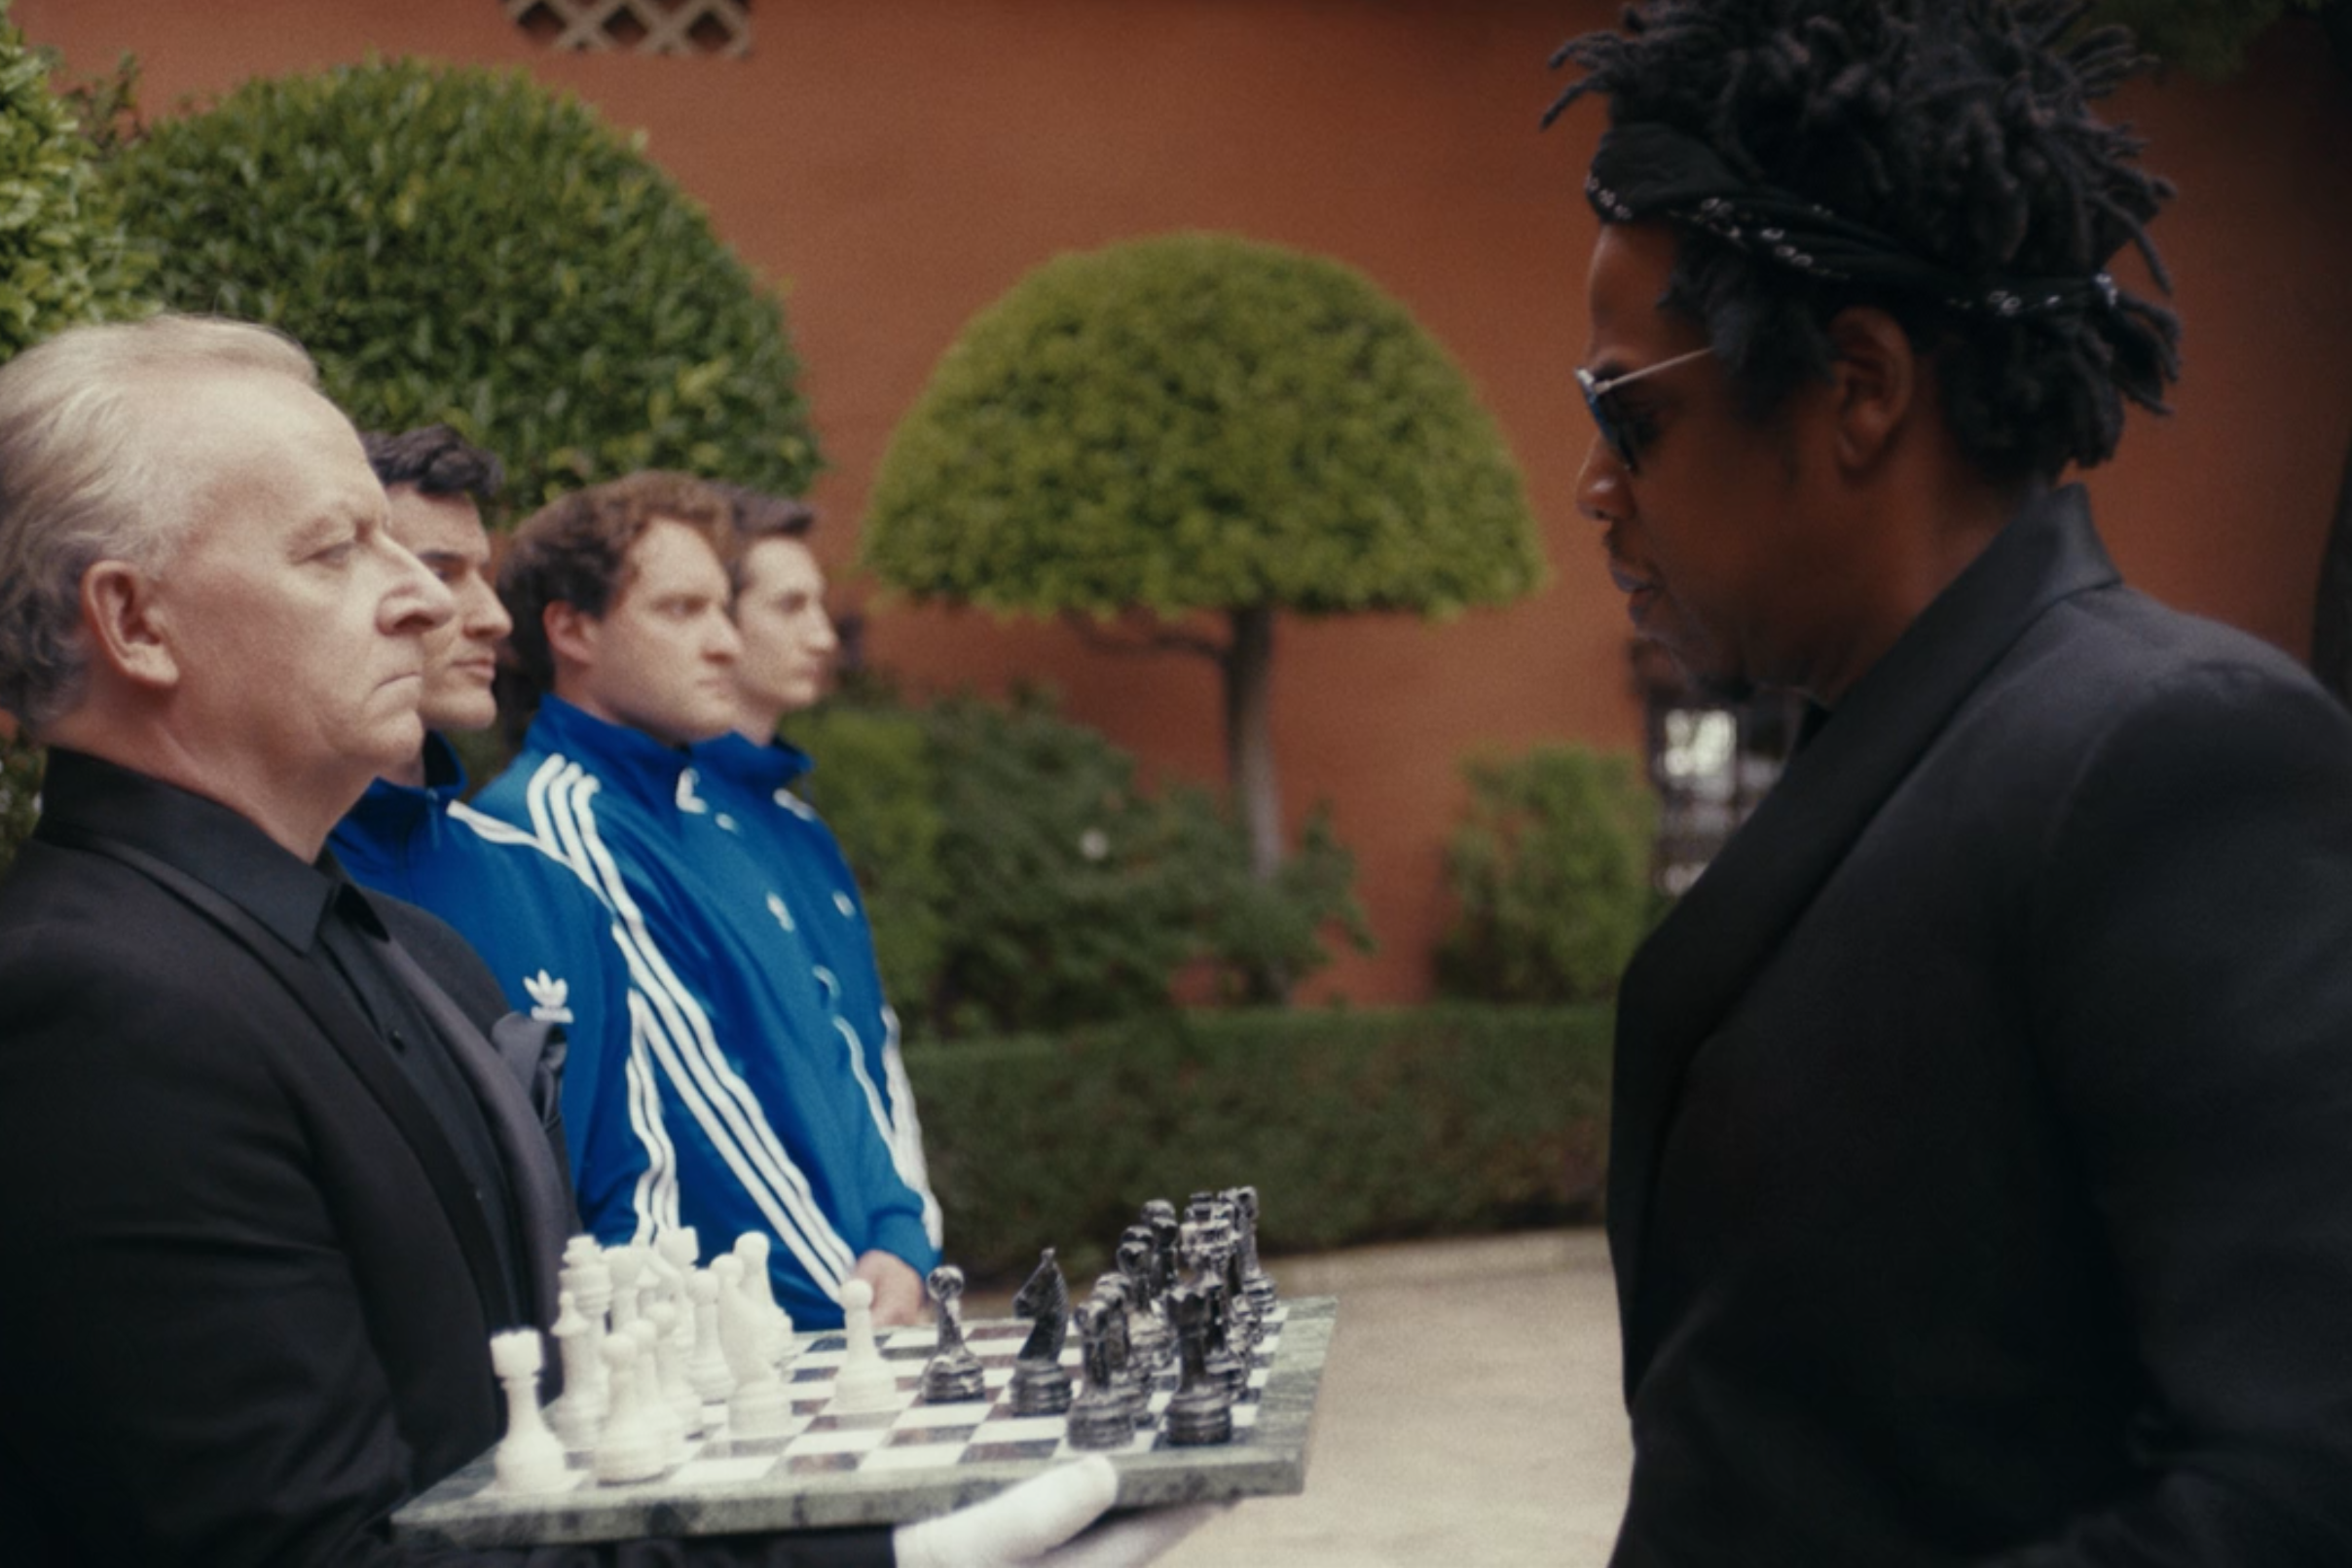 Jay-Z stands in front of a chessboard being held by a man in line with some other men.